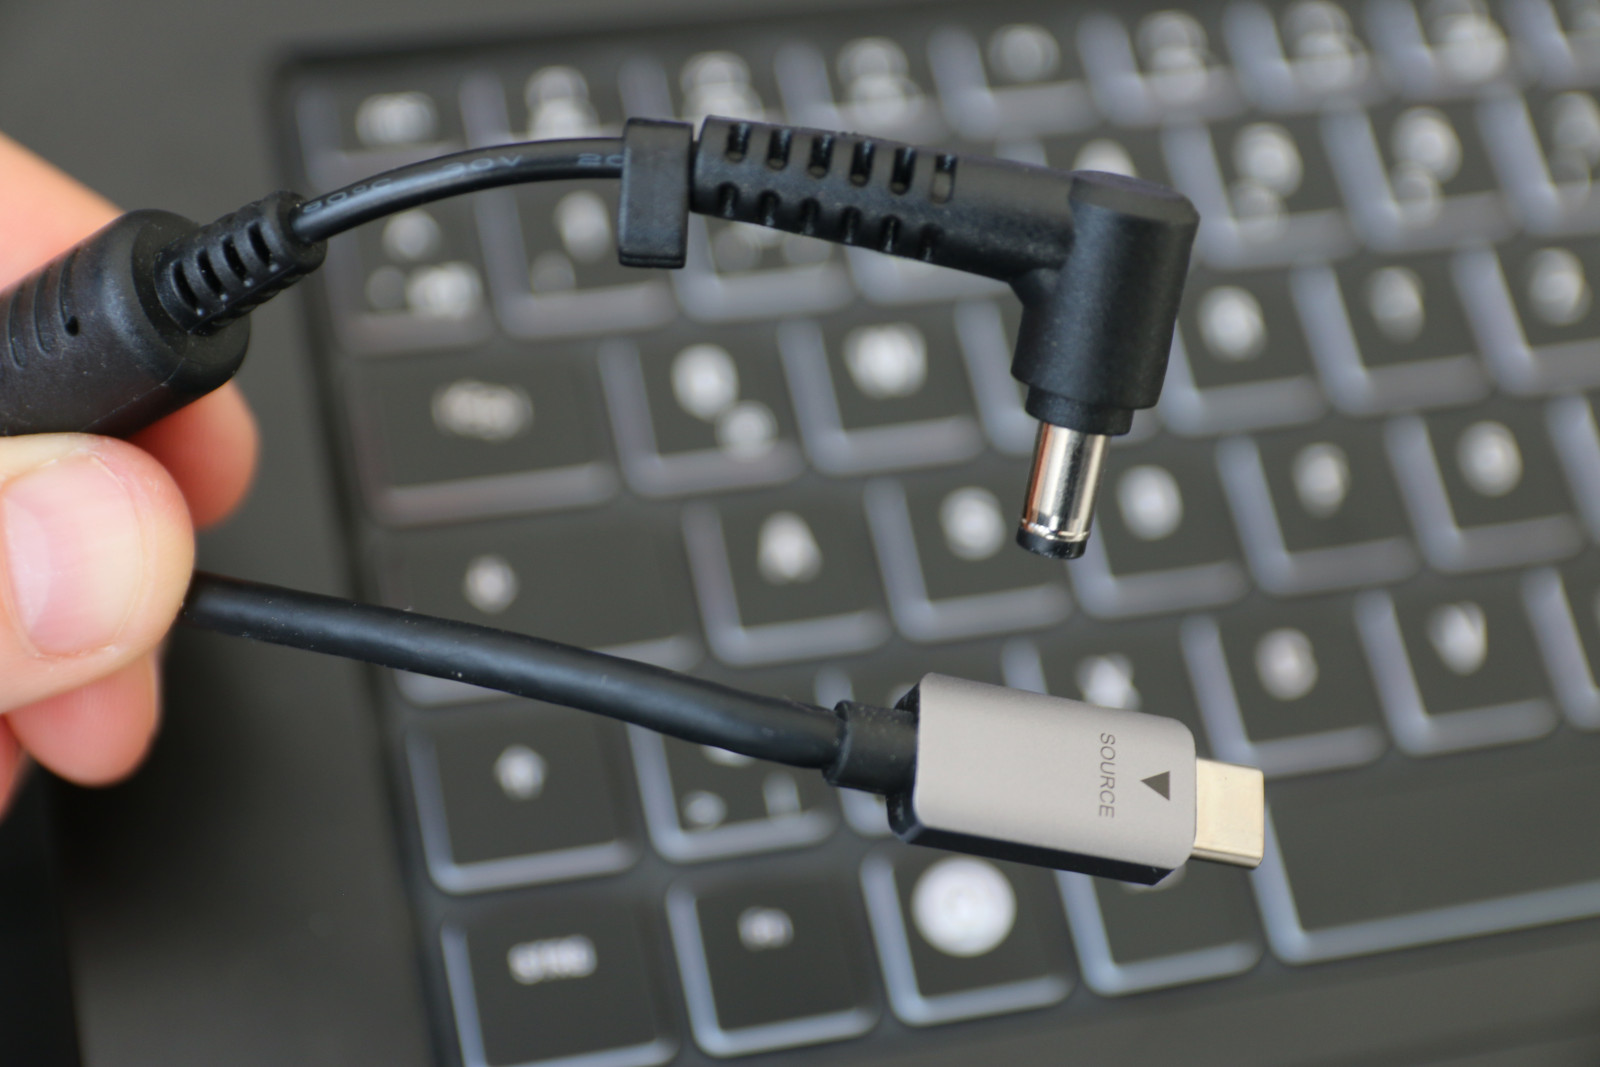 Whether a classic power supply with a hollow plug or charging via the USB-C port. There are technical differences between the various charging options.